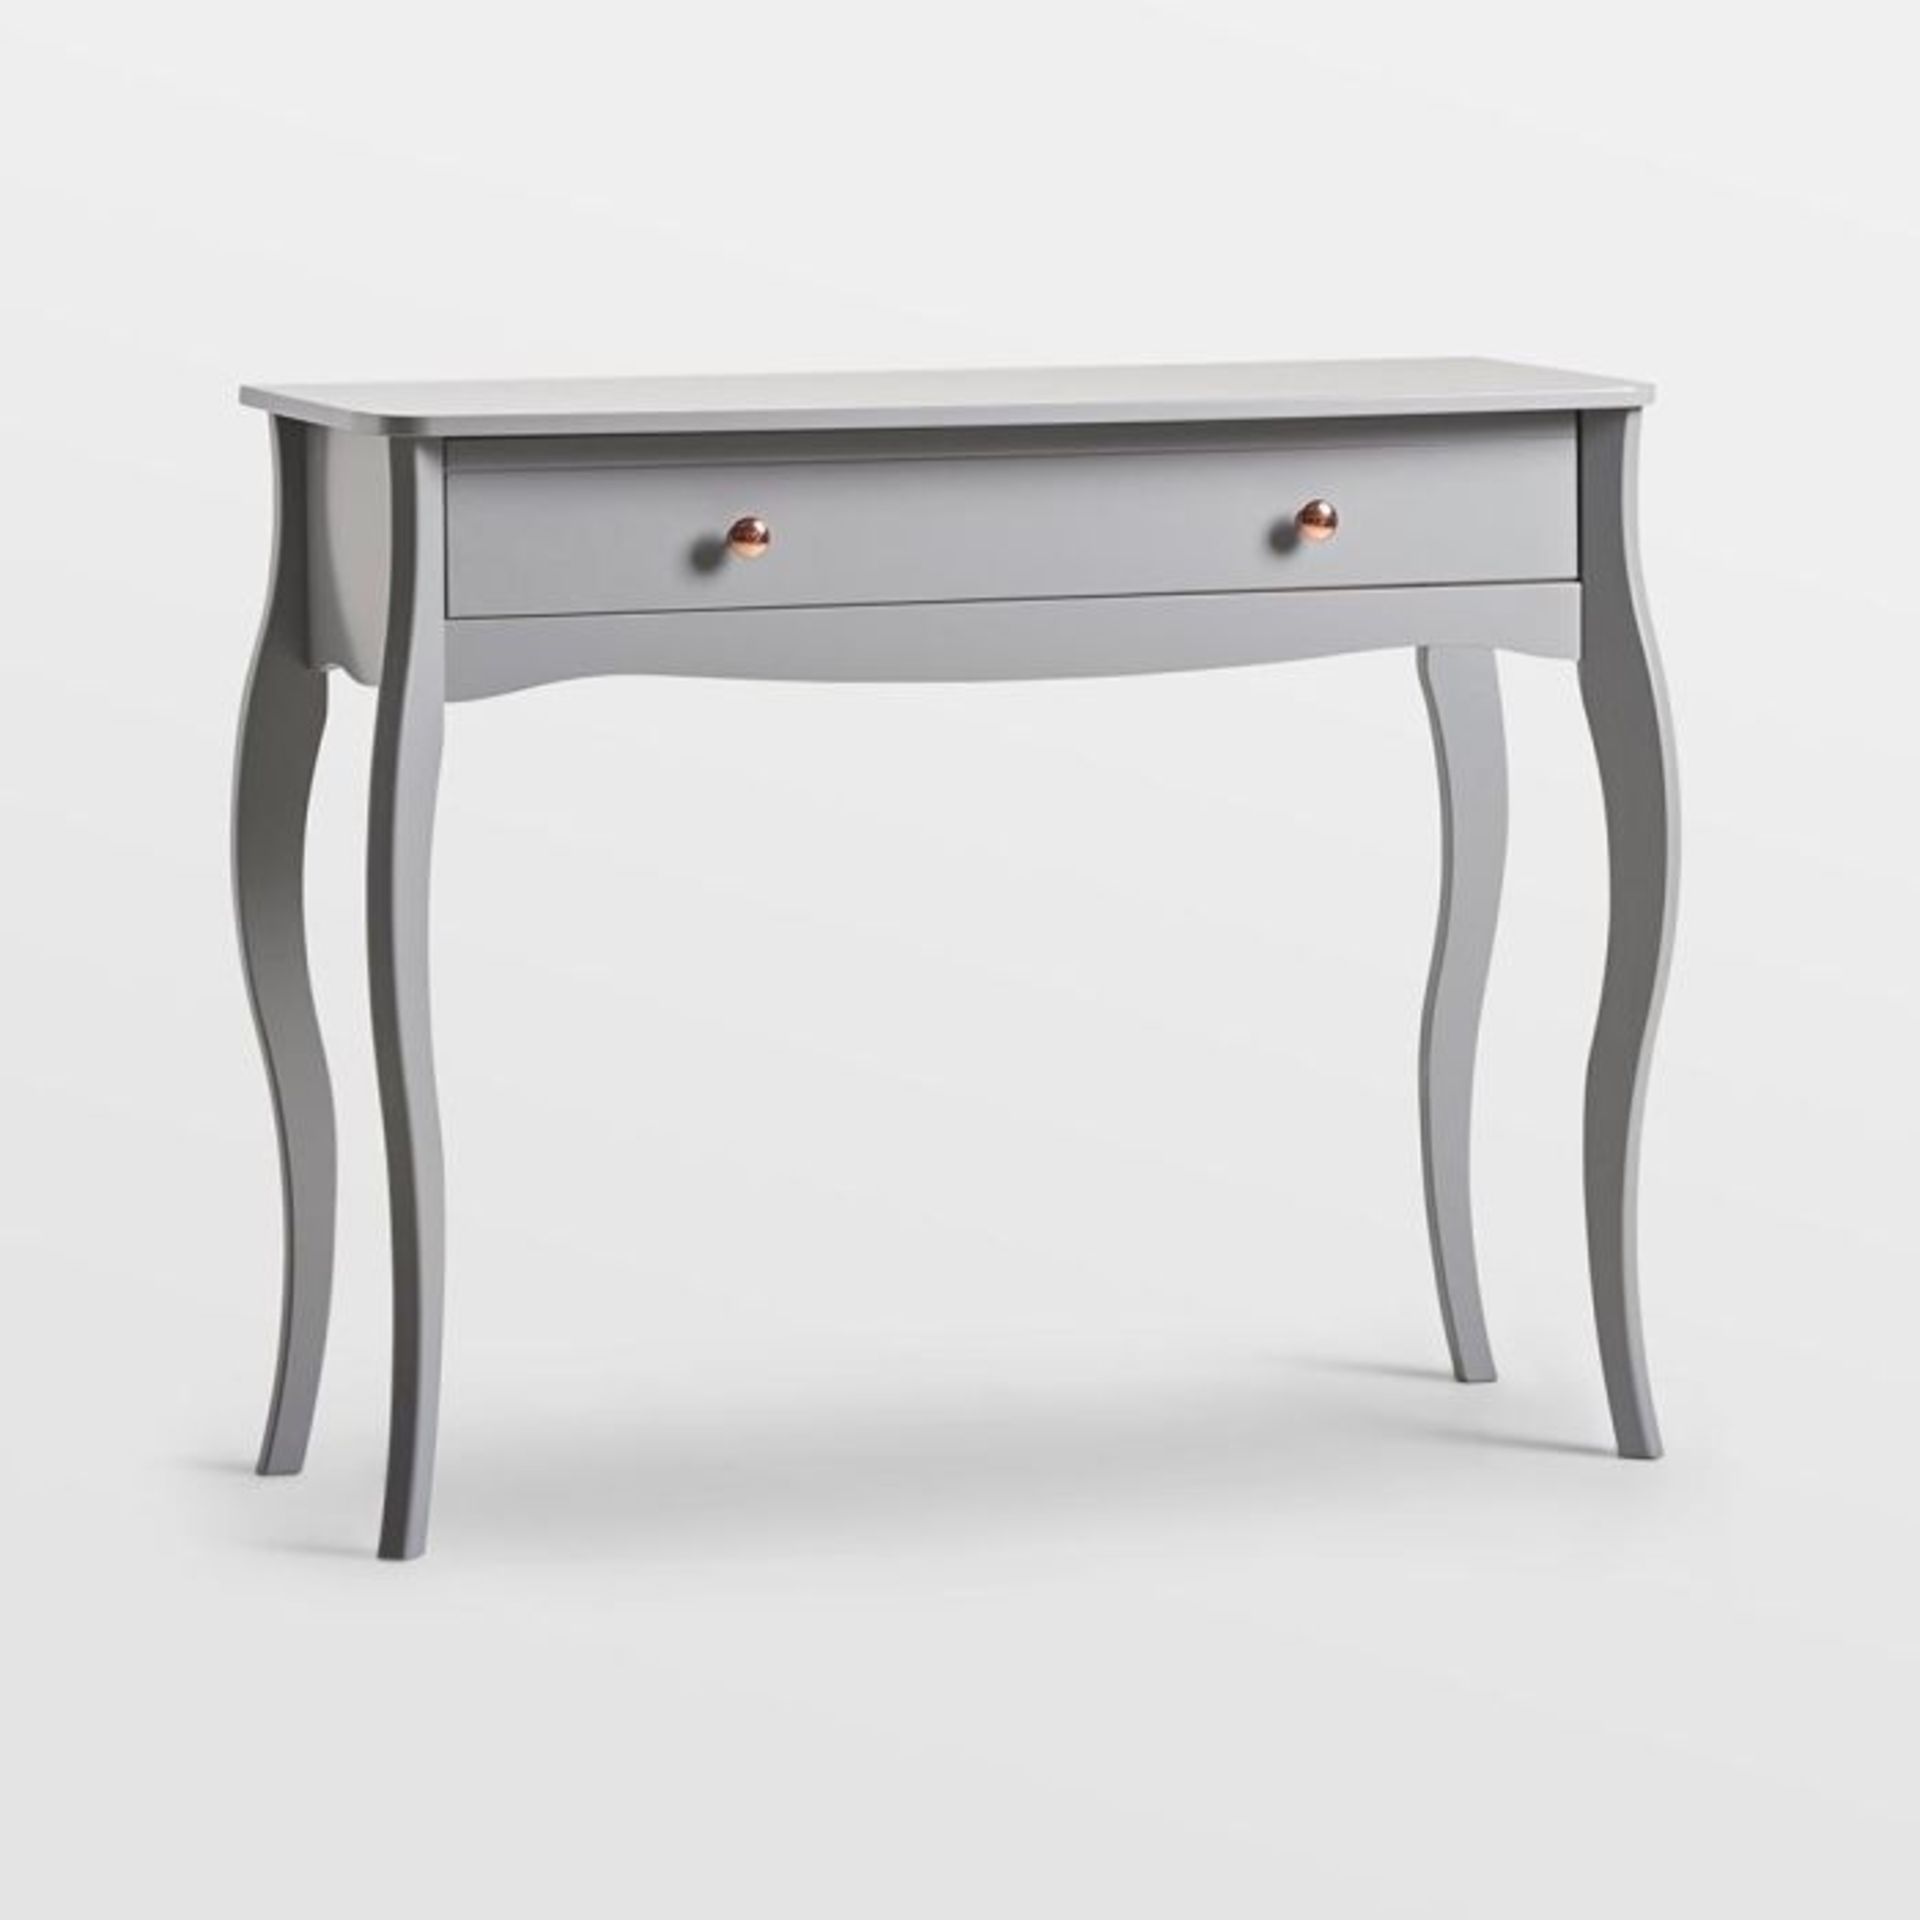 Grace Grey Dressing Table Desk. - ER33. With a cool grey finish, bold legwork contouring and